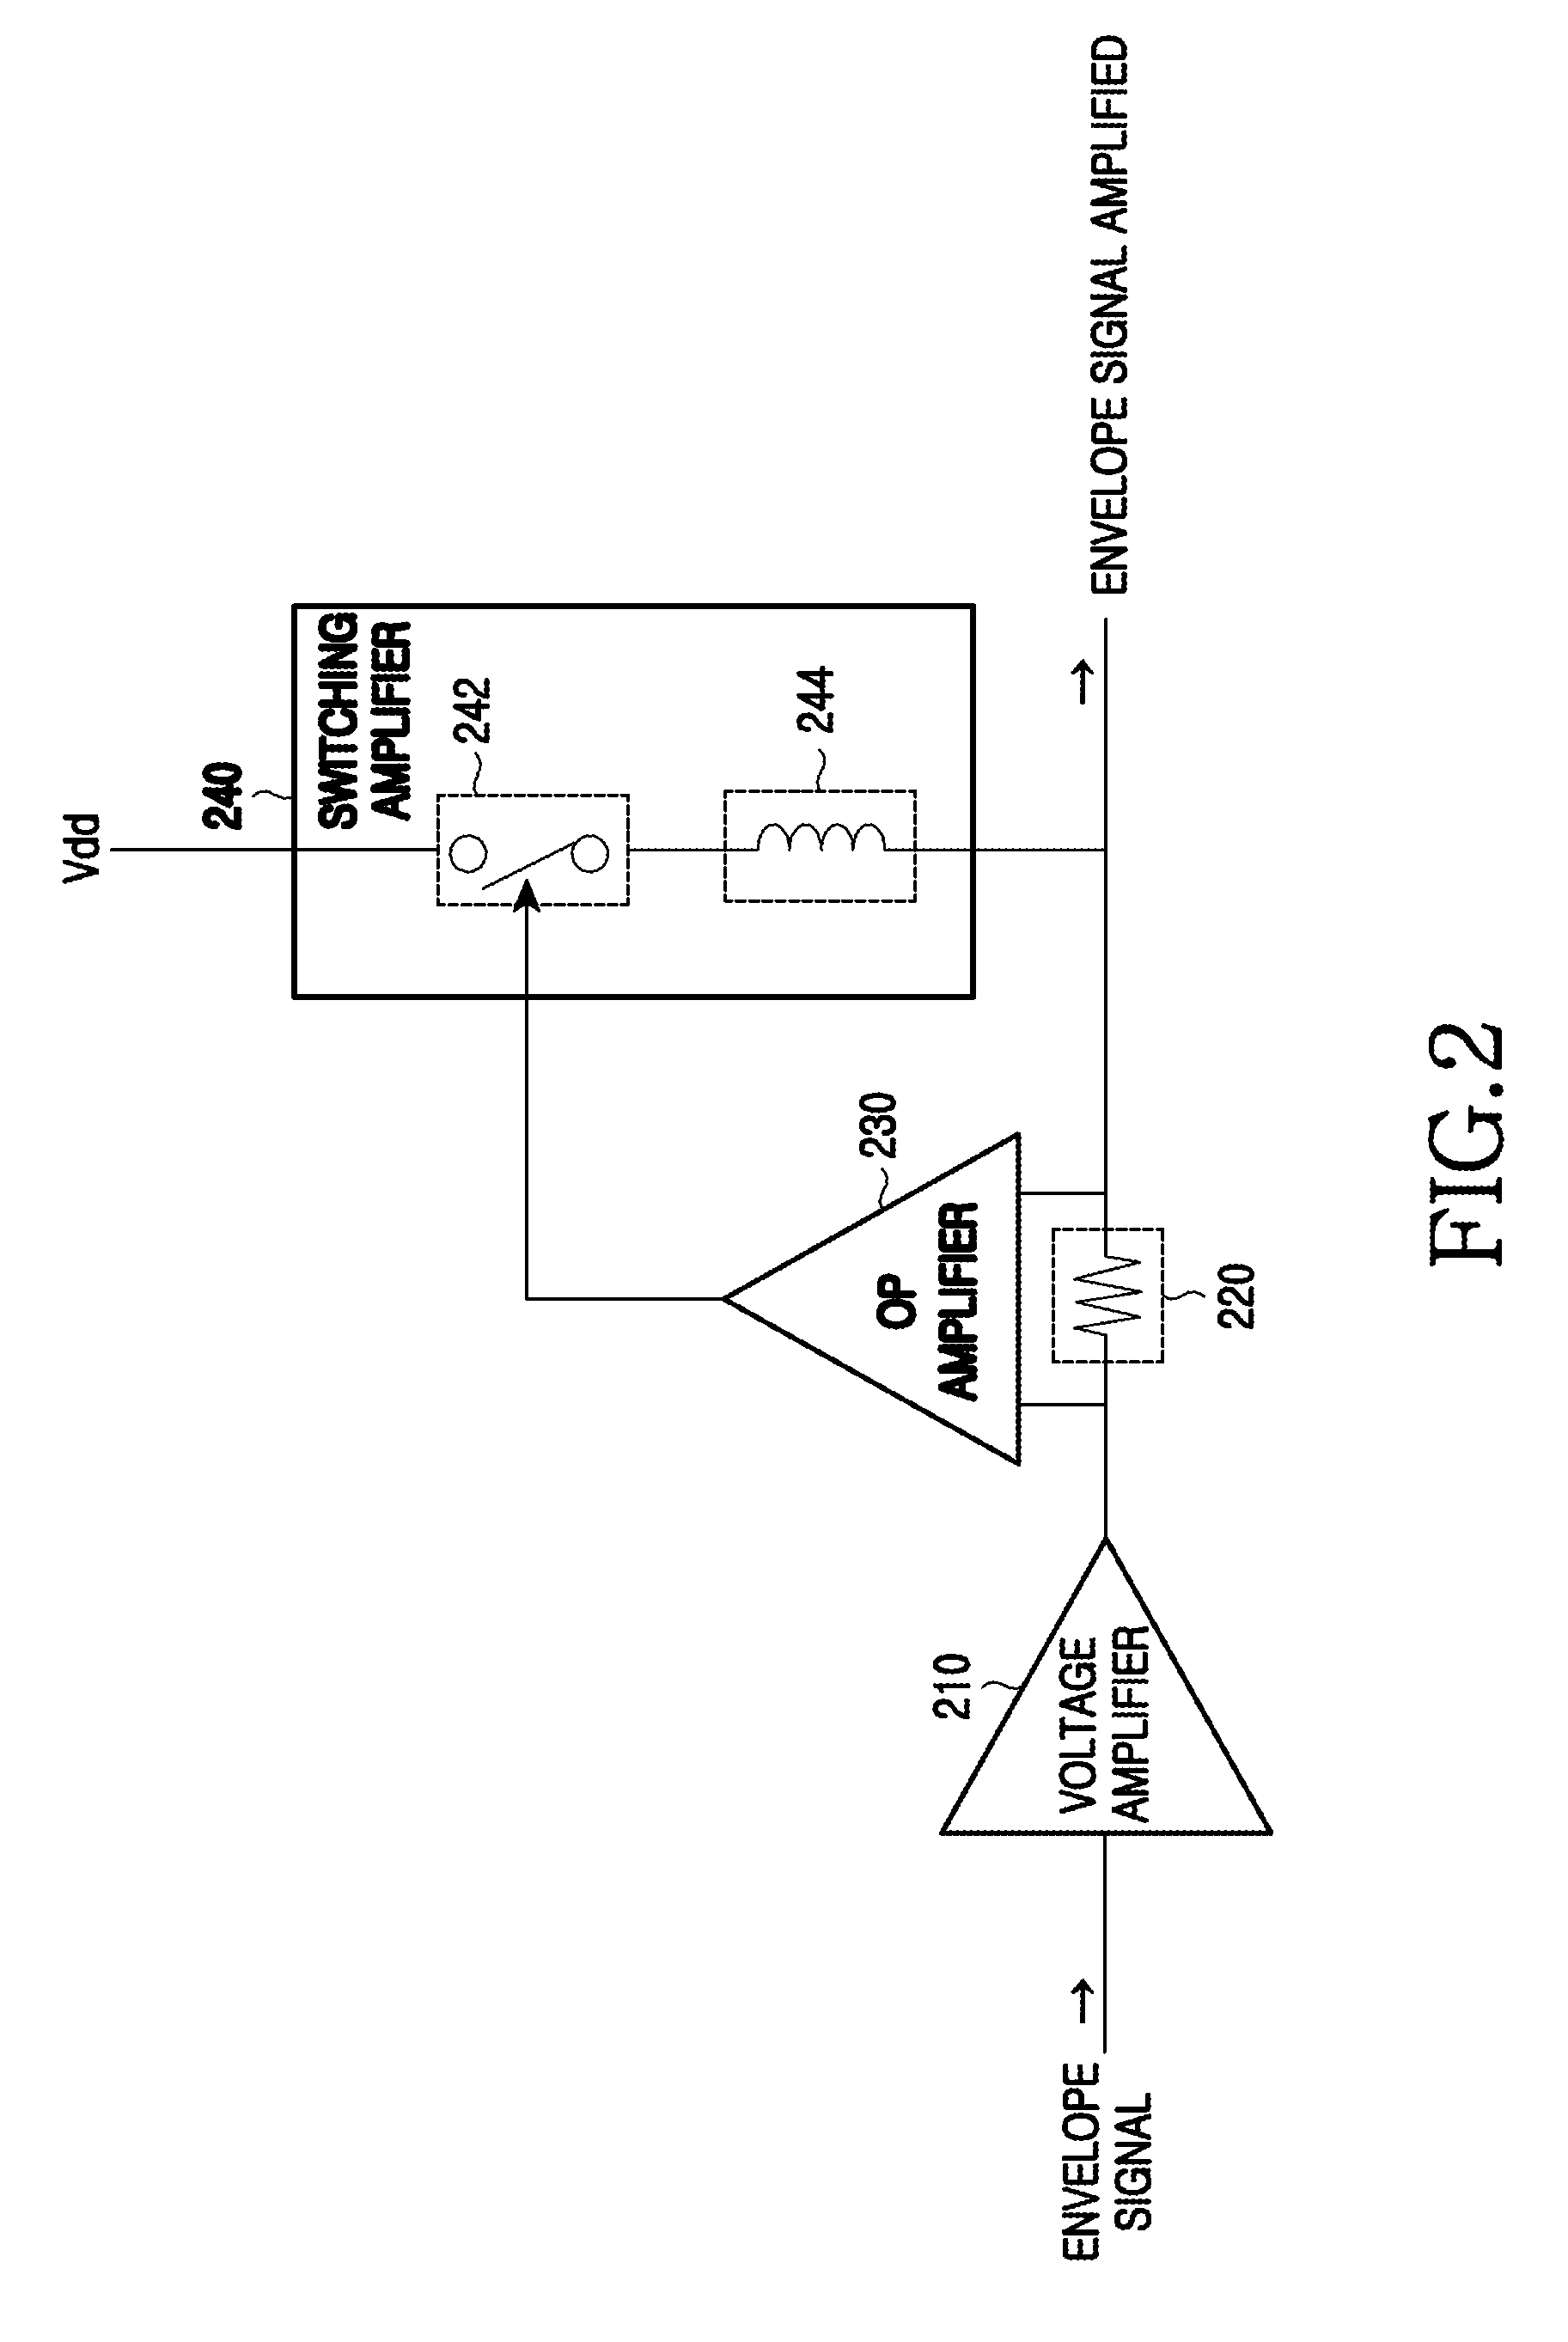 Apparatus for power amplification based on envelope elimination and restoration (EER) and push-pull switching